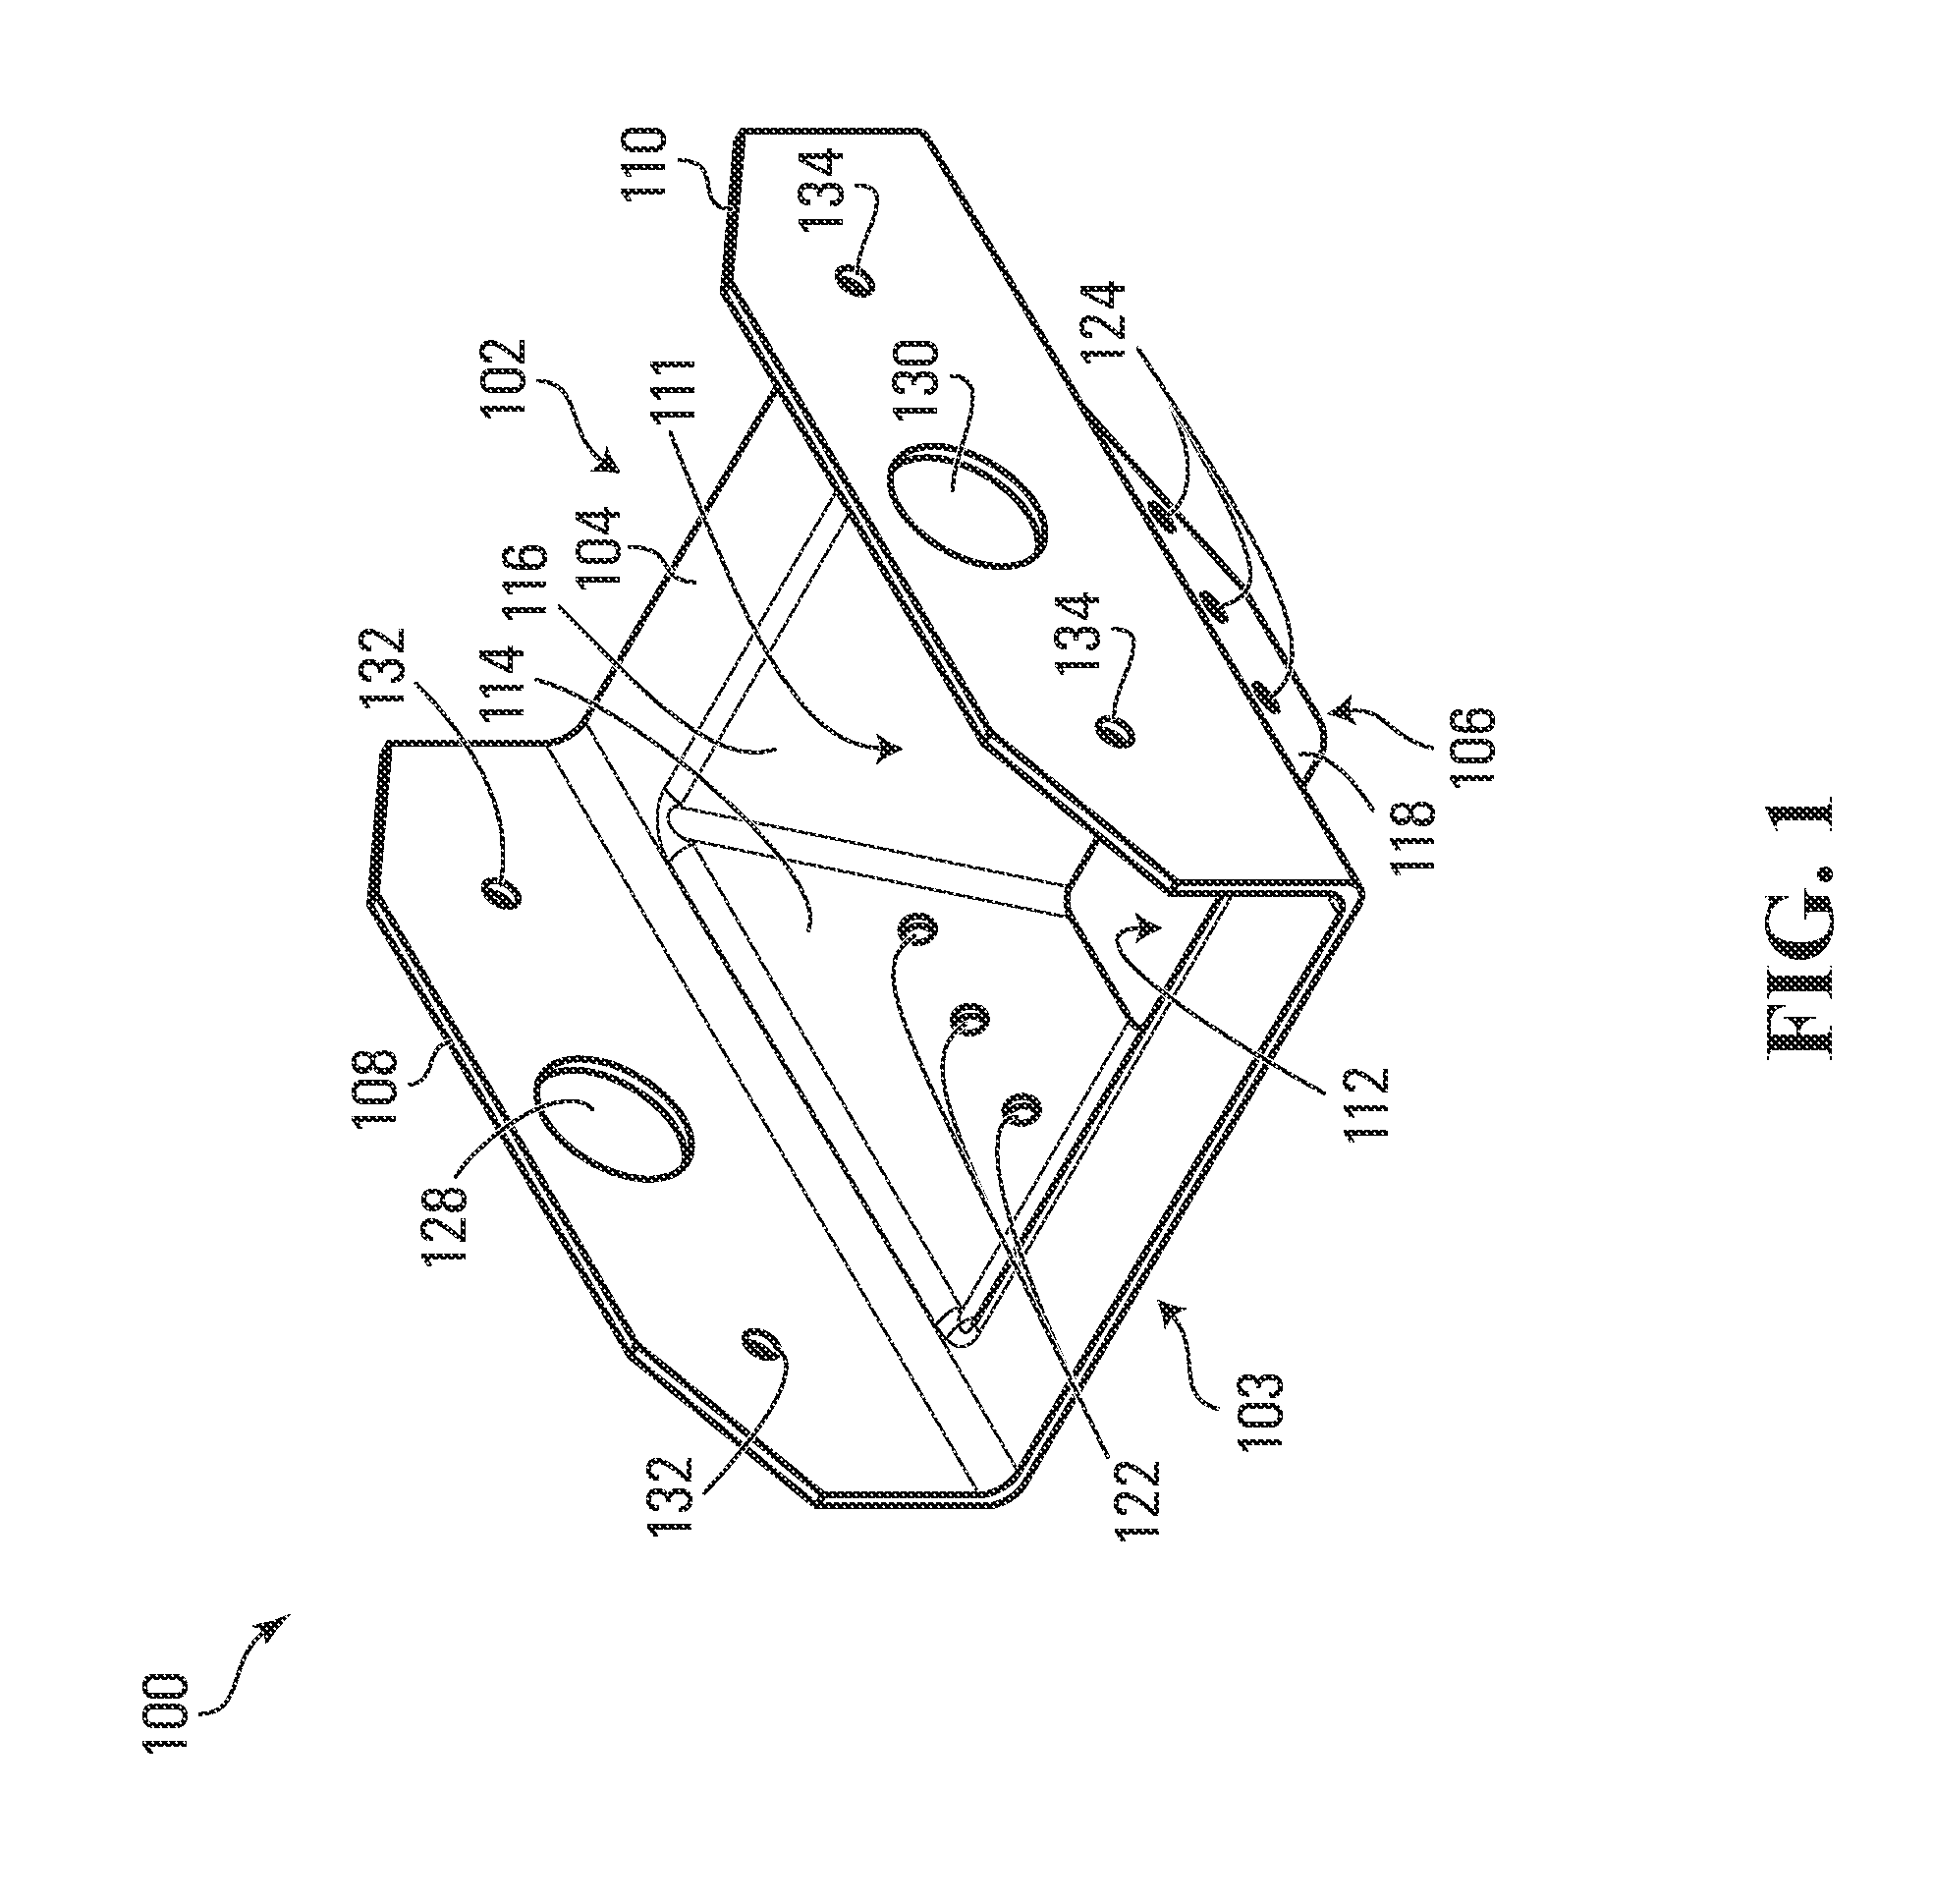 Connector system and building components for use in building construction